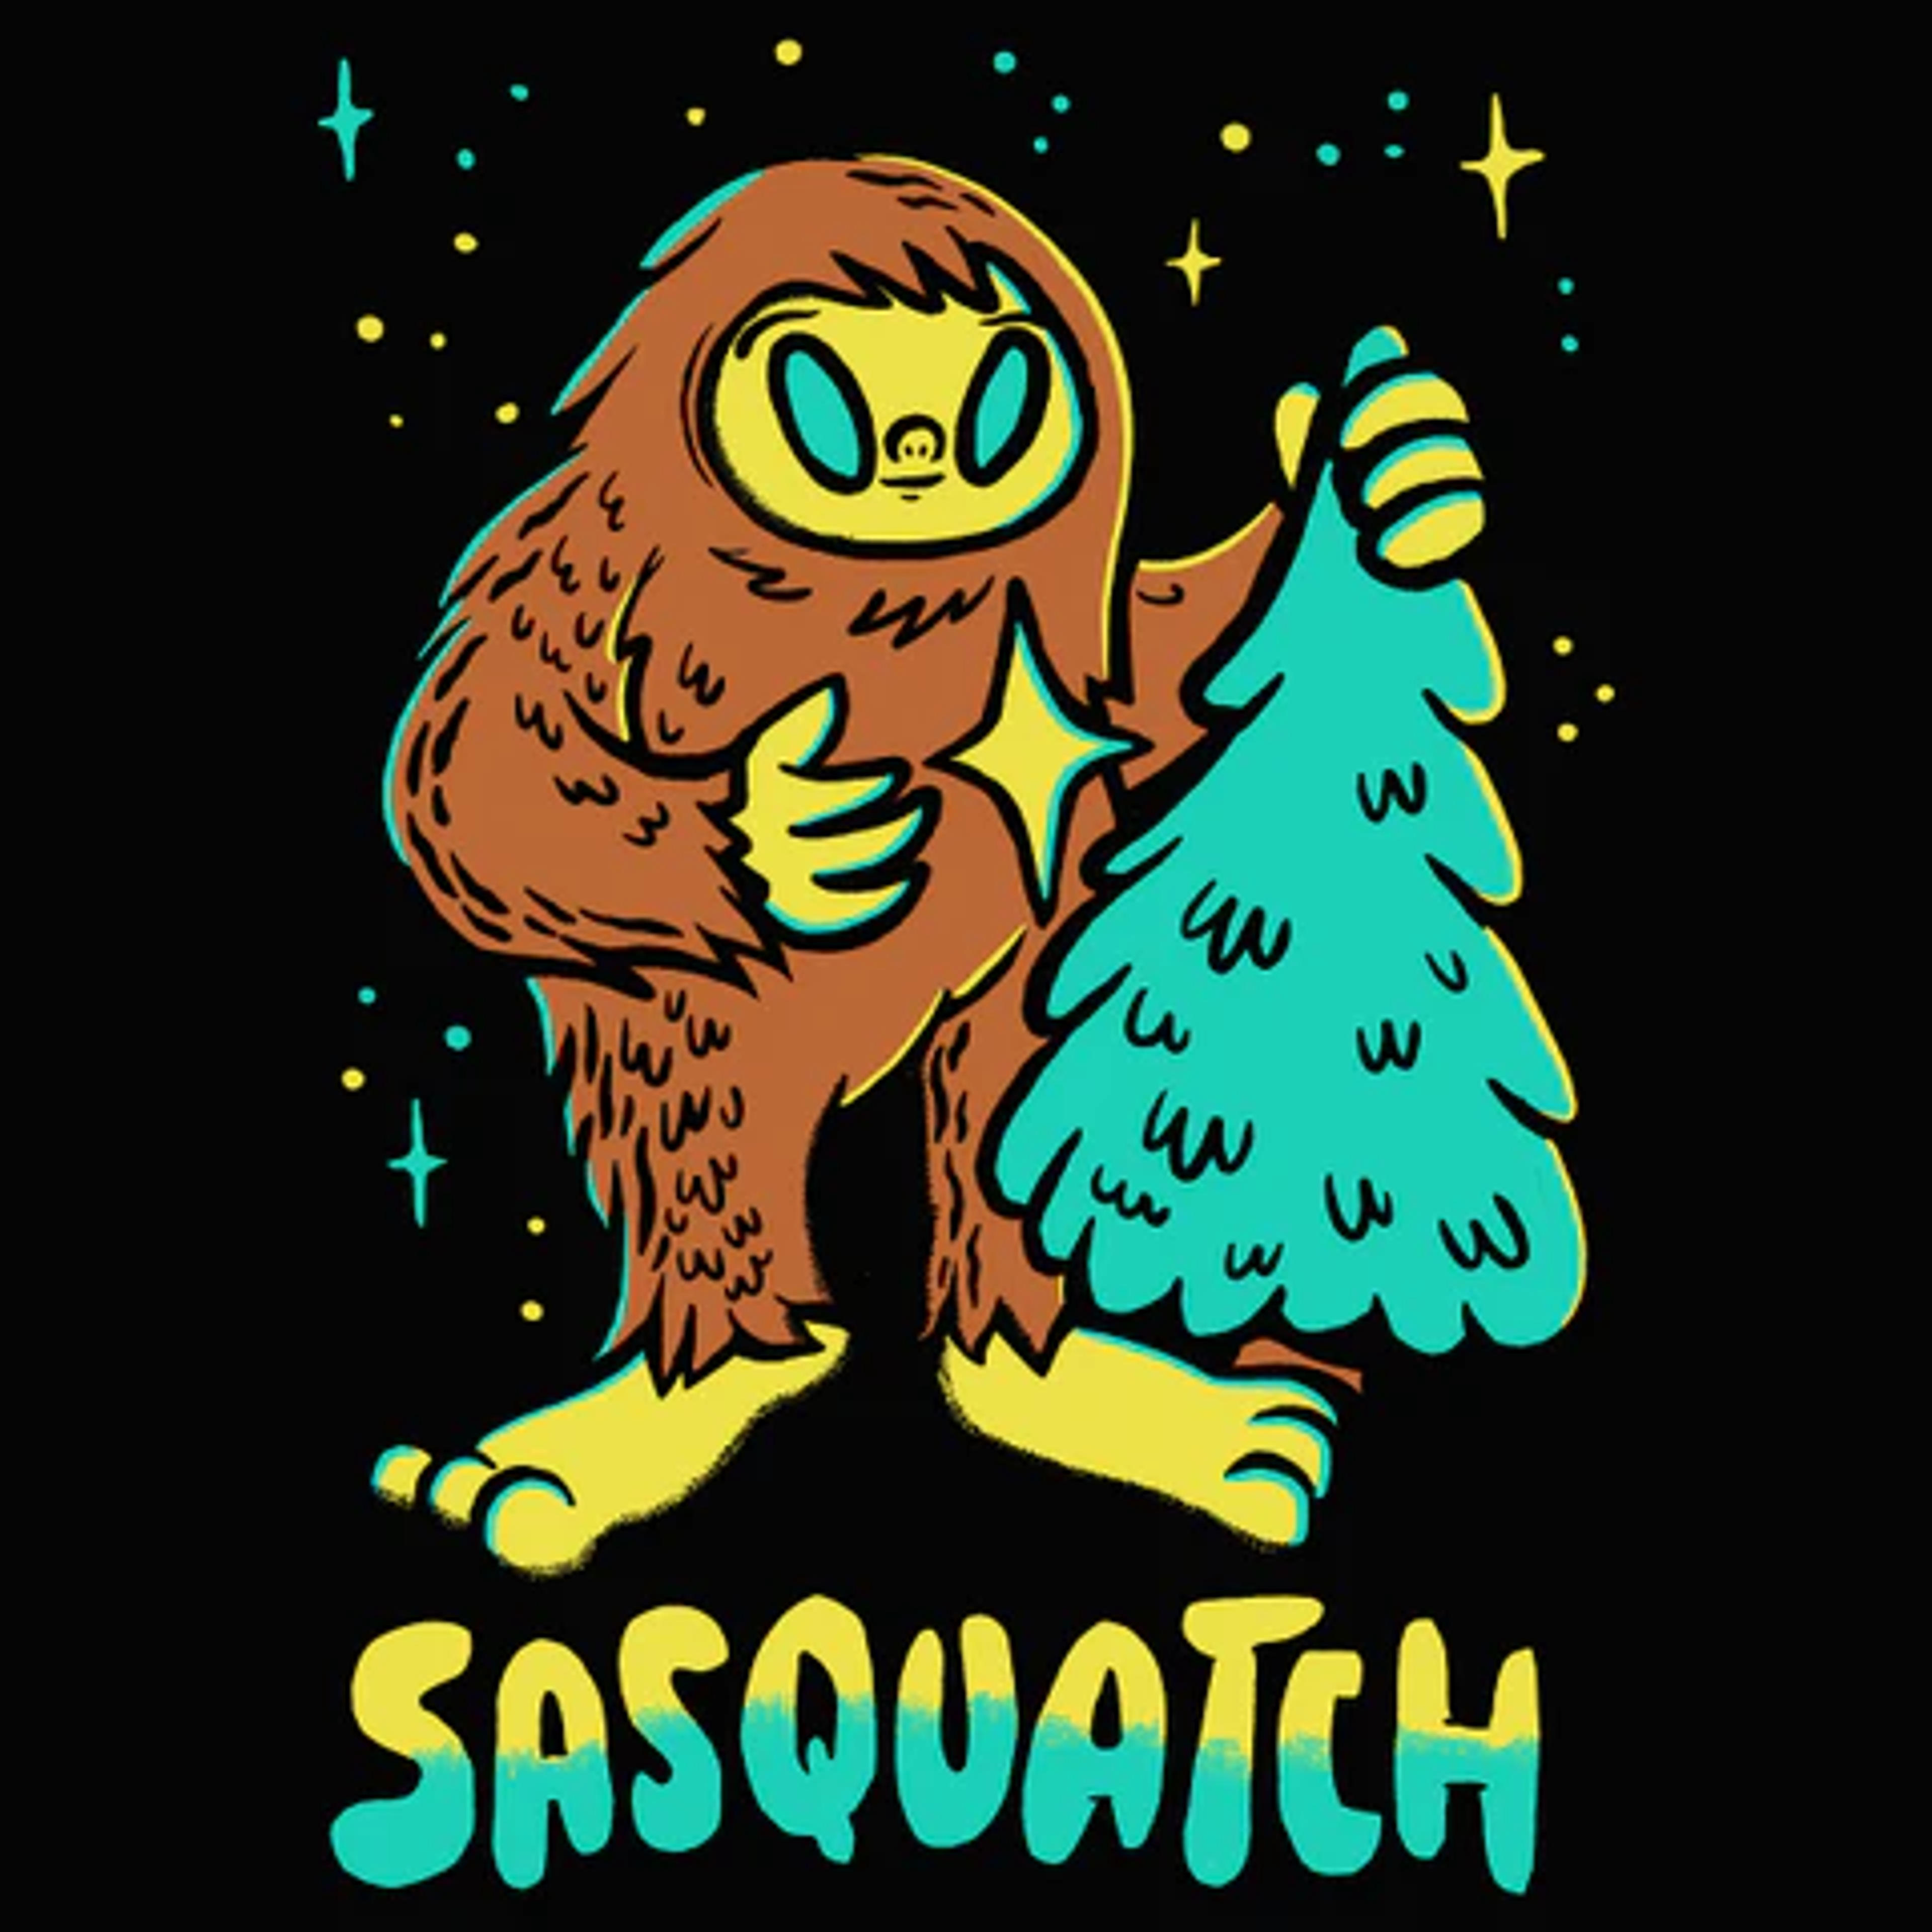 'Sasquatch' Shirt | Halloween Shirts For Witches | Wicked Clothes